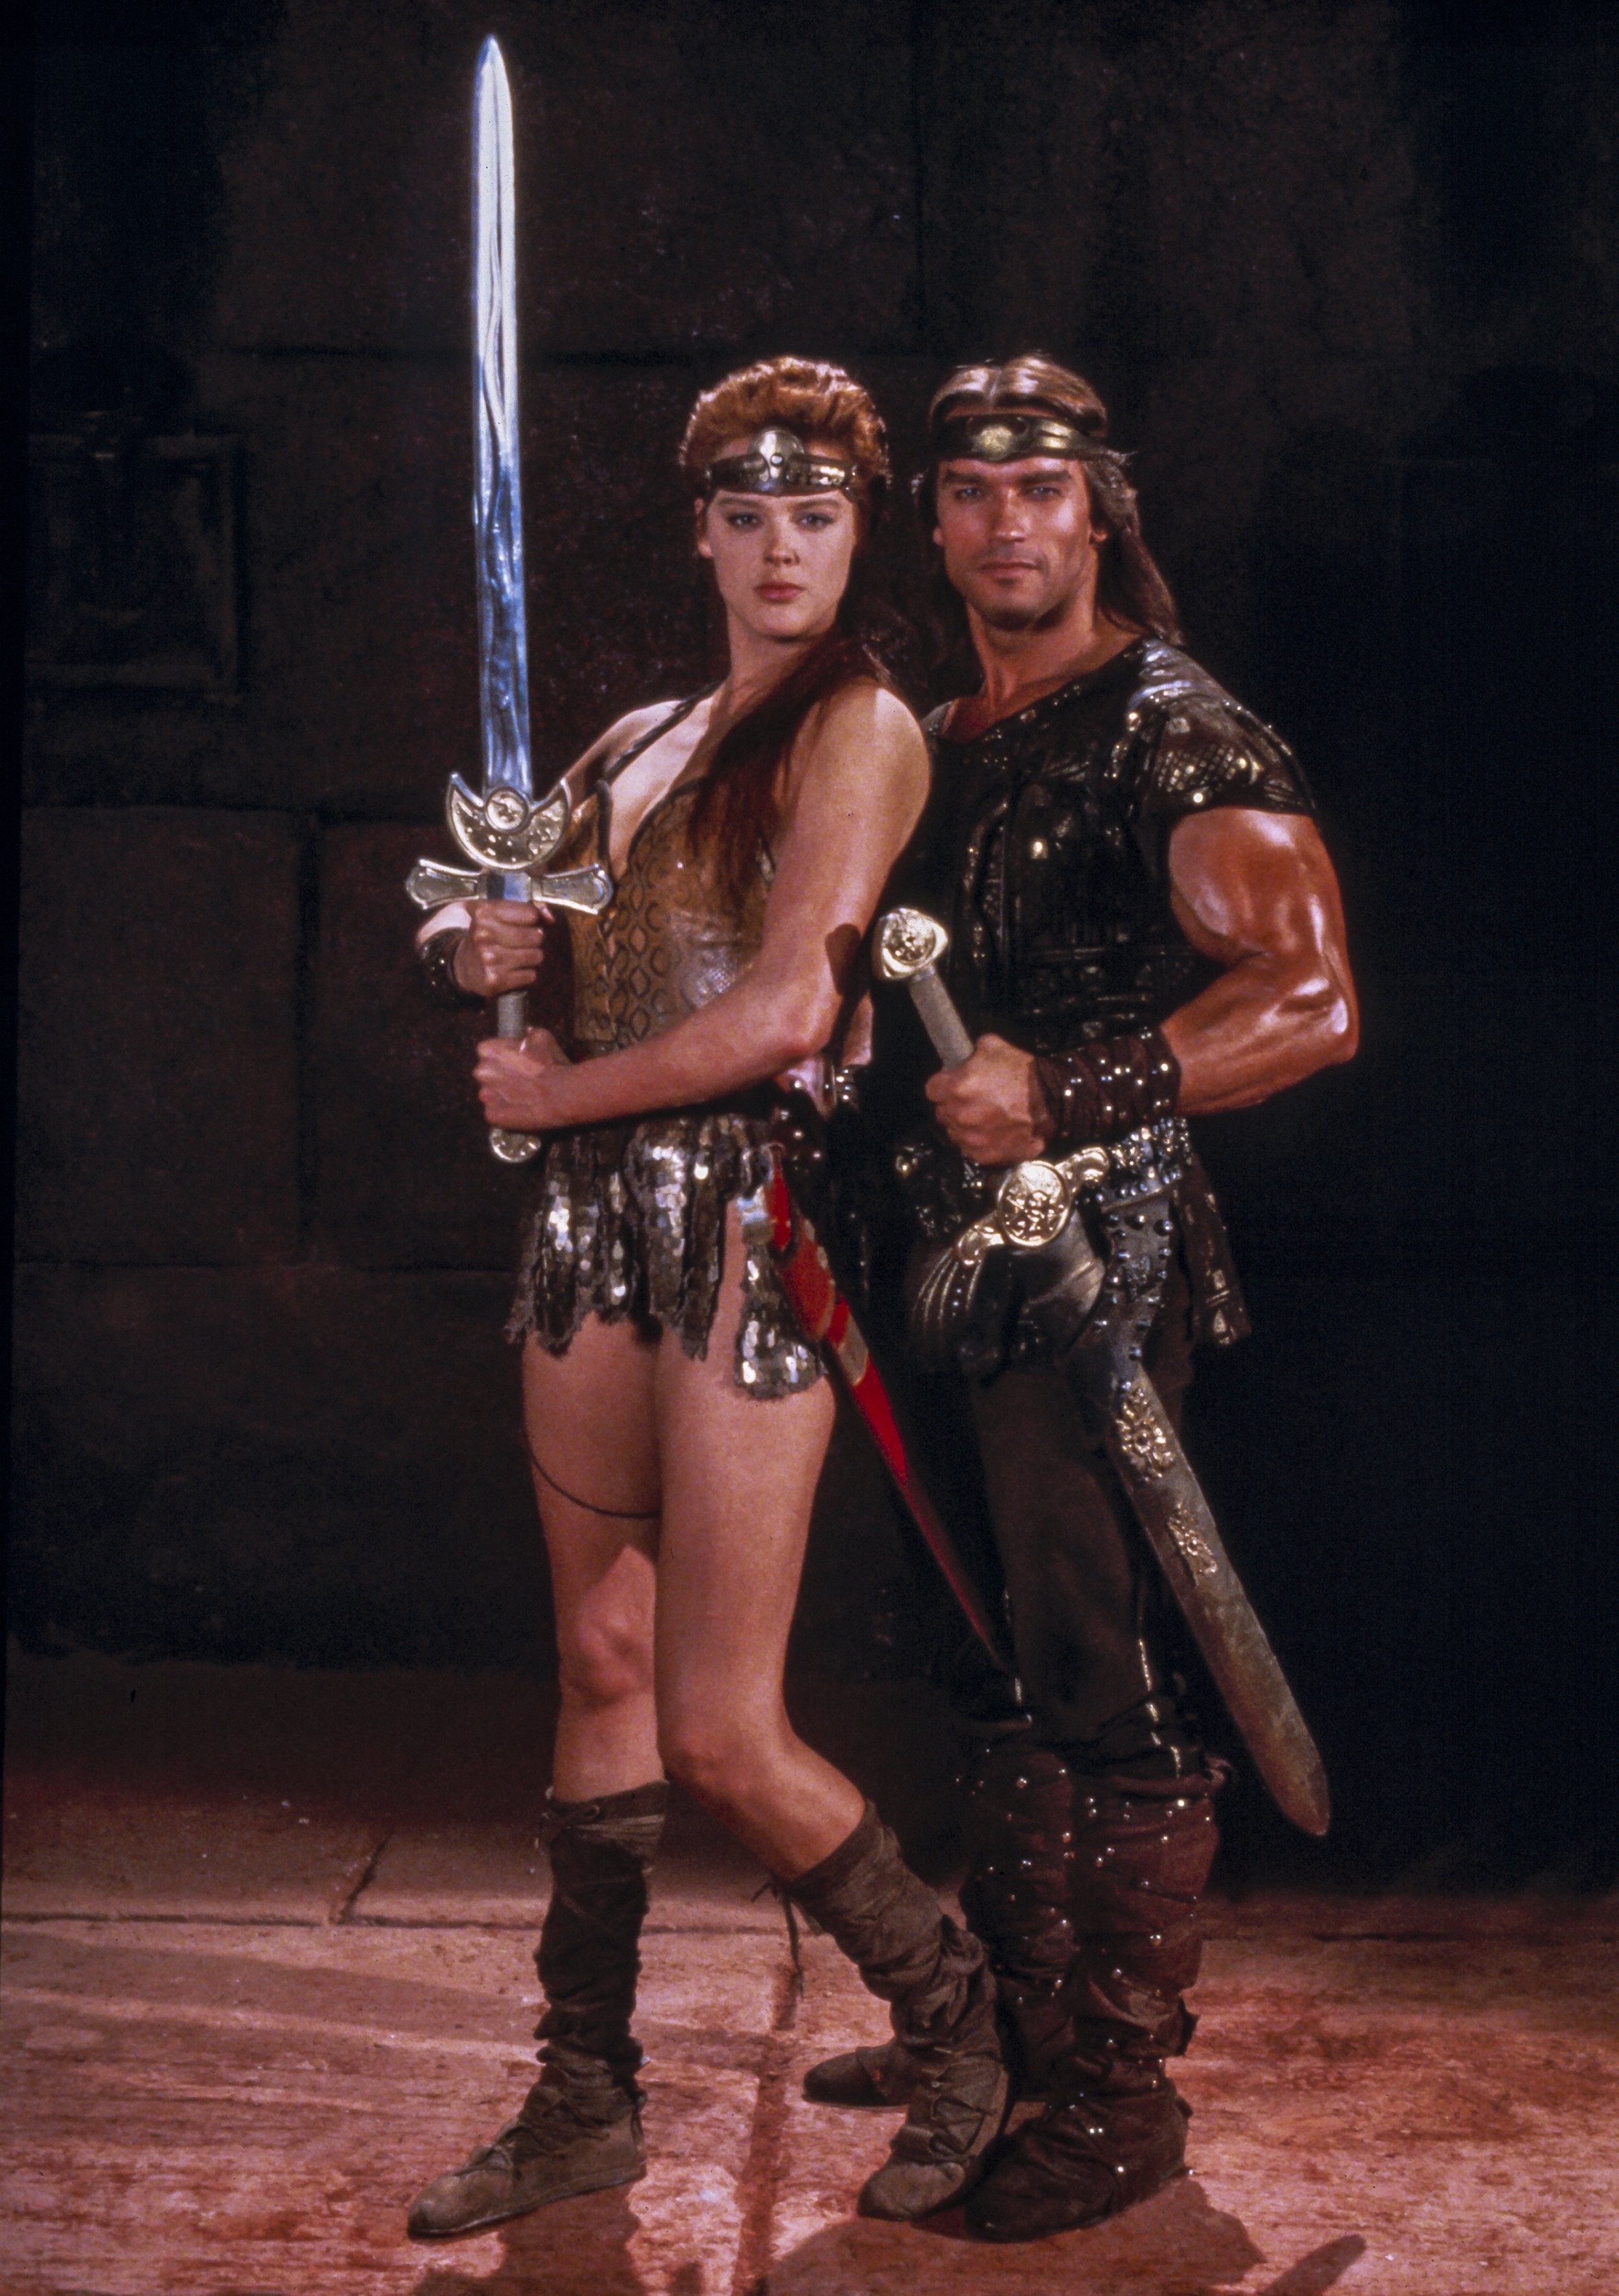 Arnold Schwarzenegger and Brigitte Nielsen in "Red Sonja" in Rome Italy 1984 | Source: Getty Images